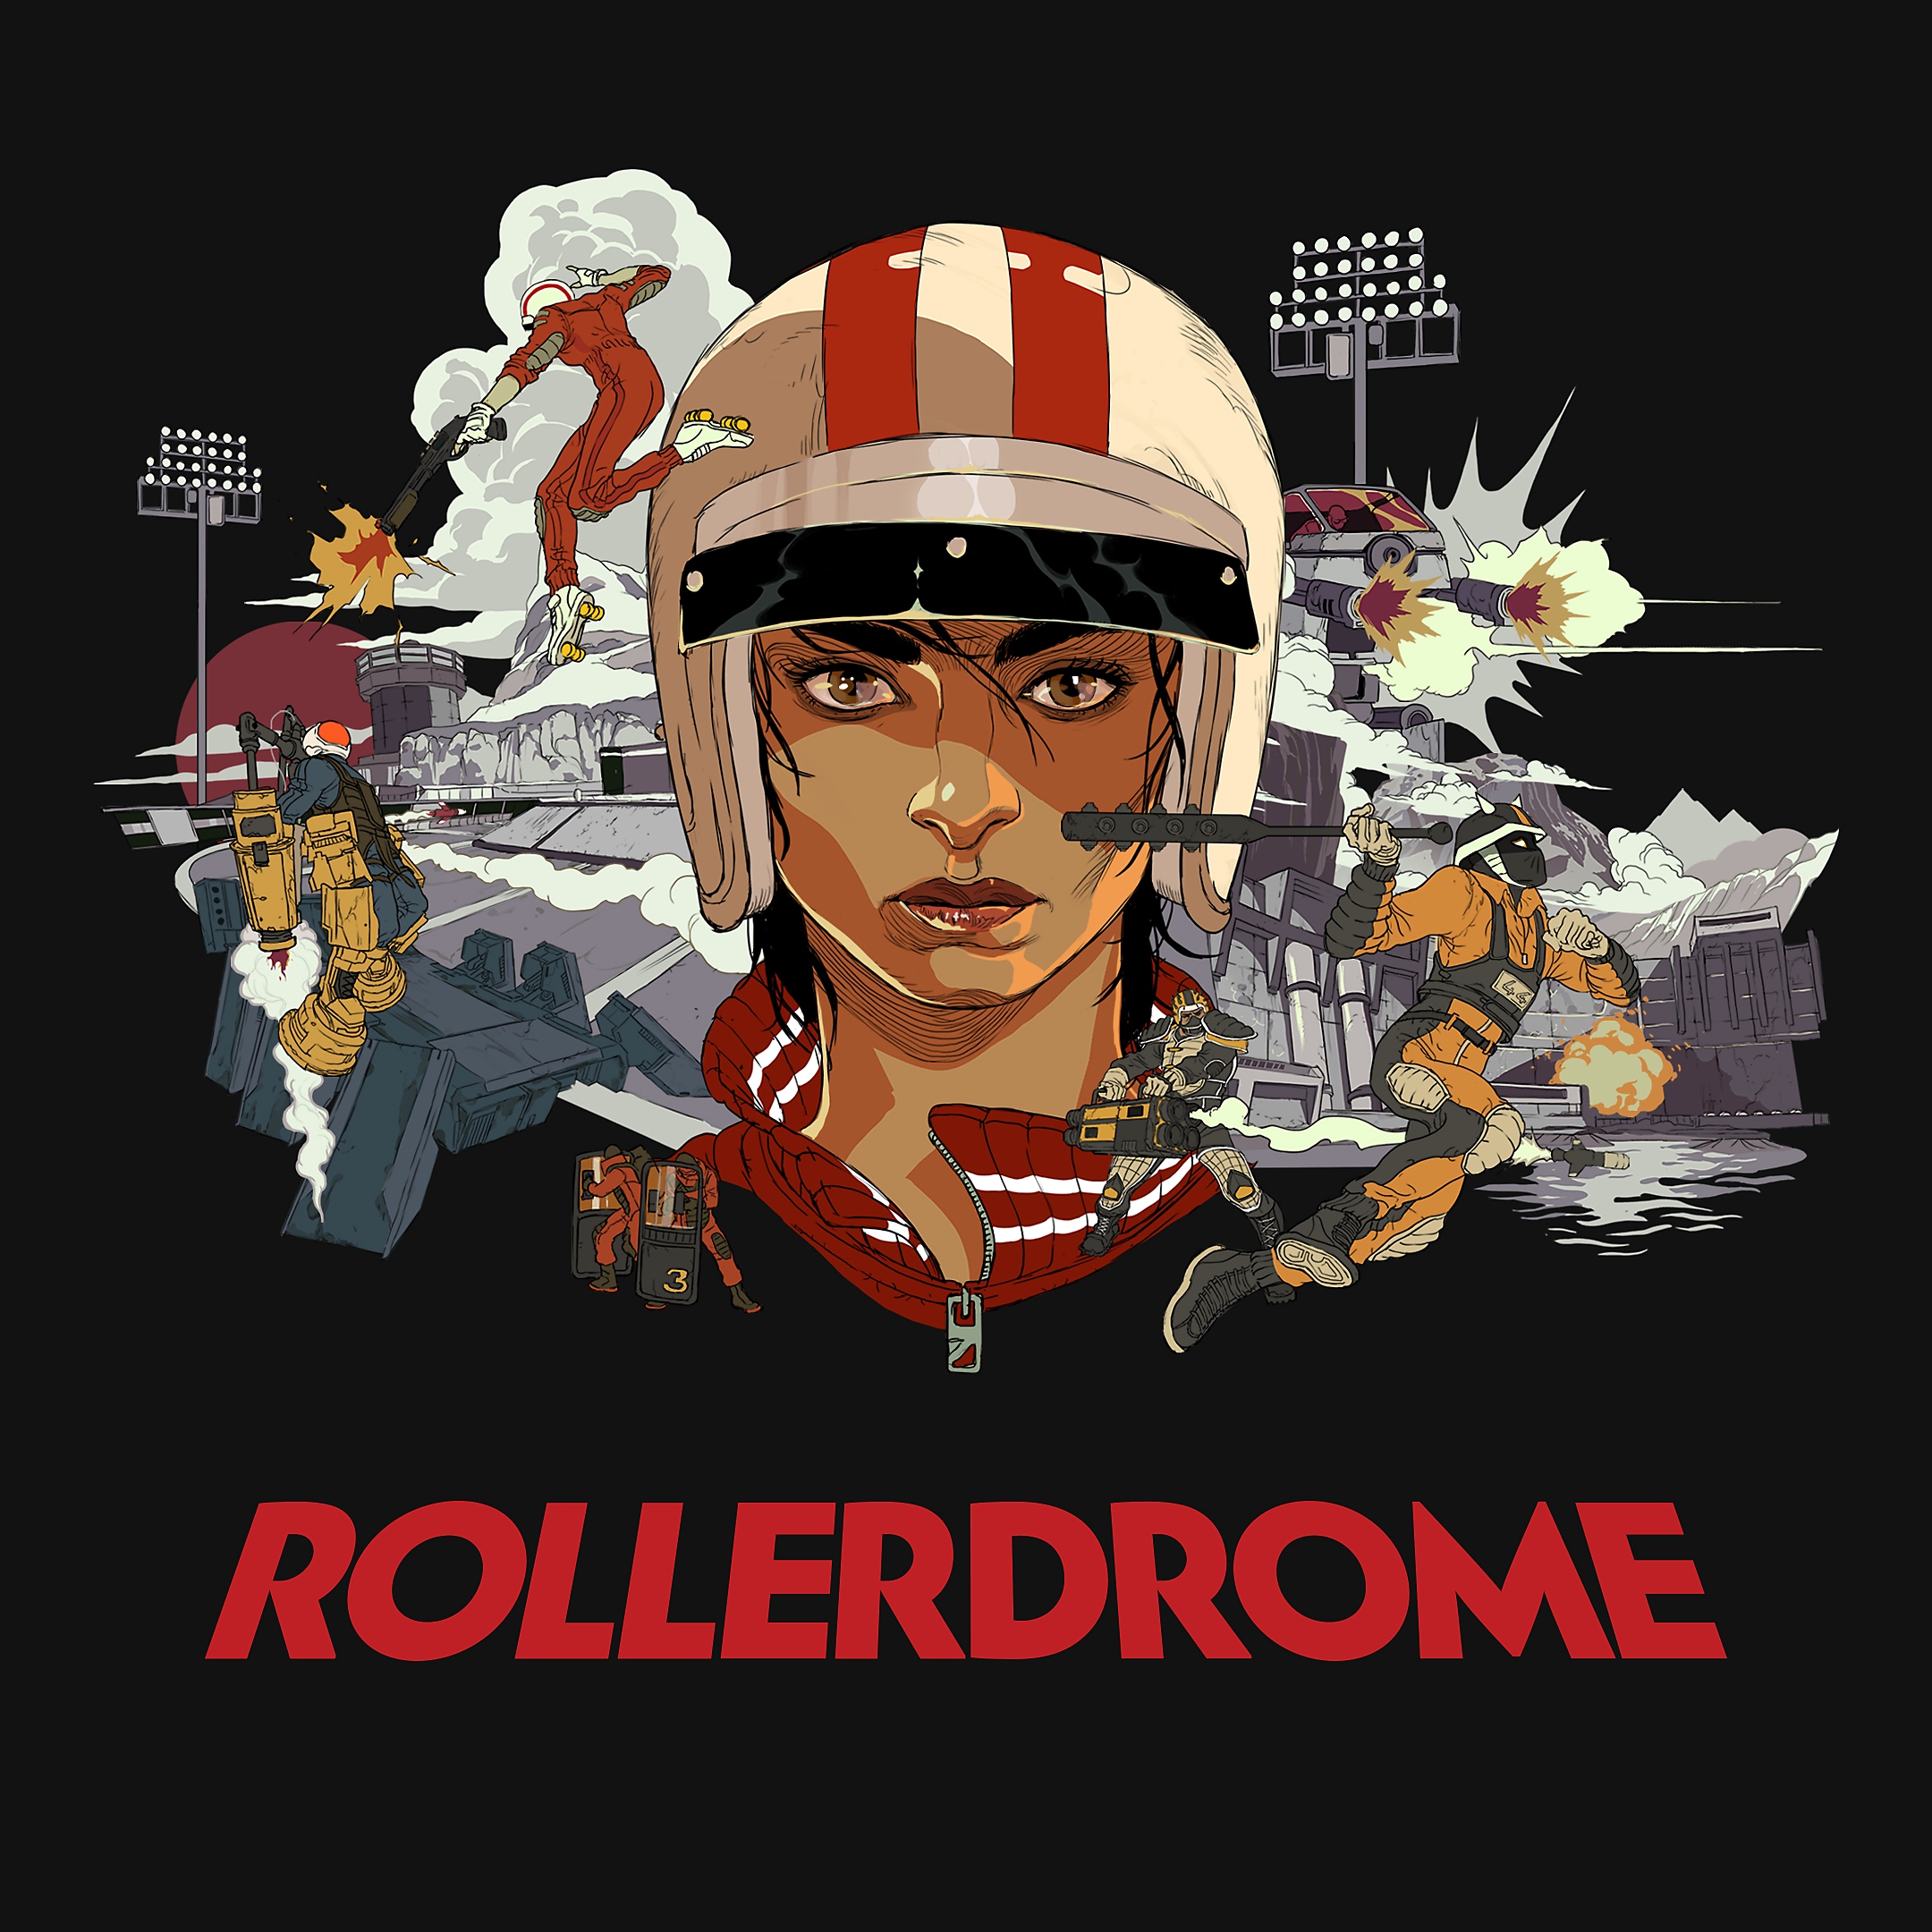 Rollerdrome 22 key art showing main characters posing with weapons